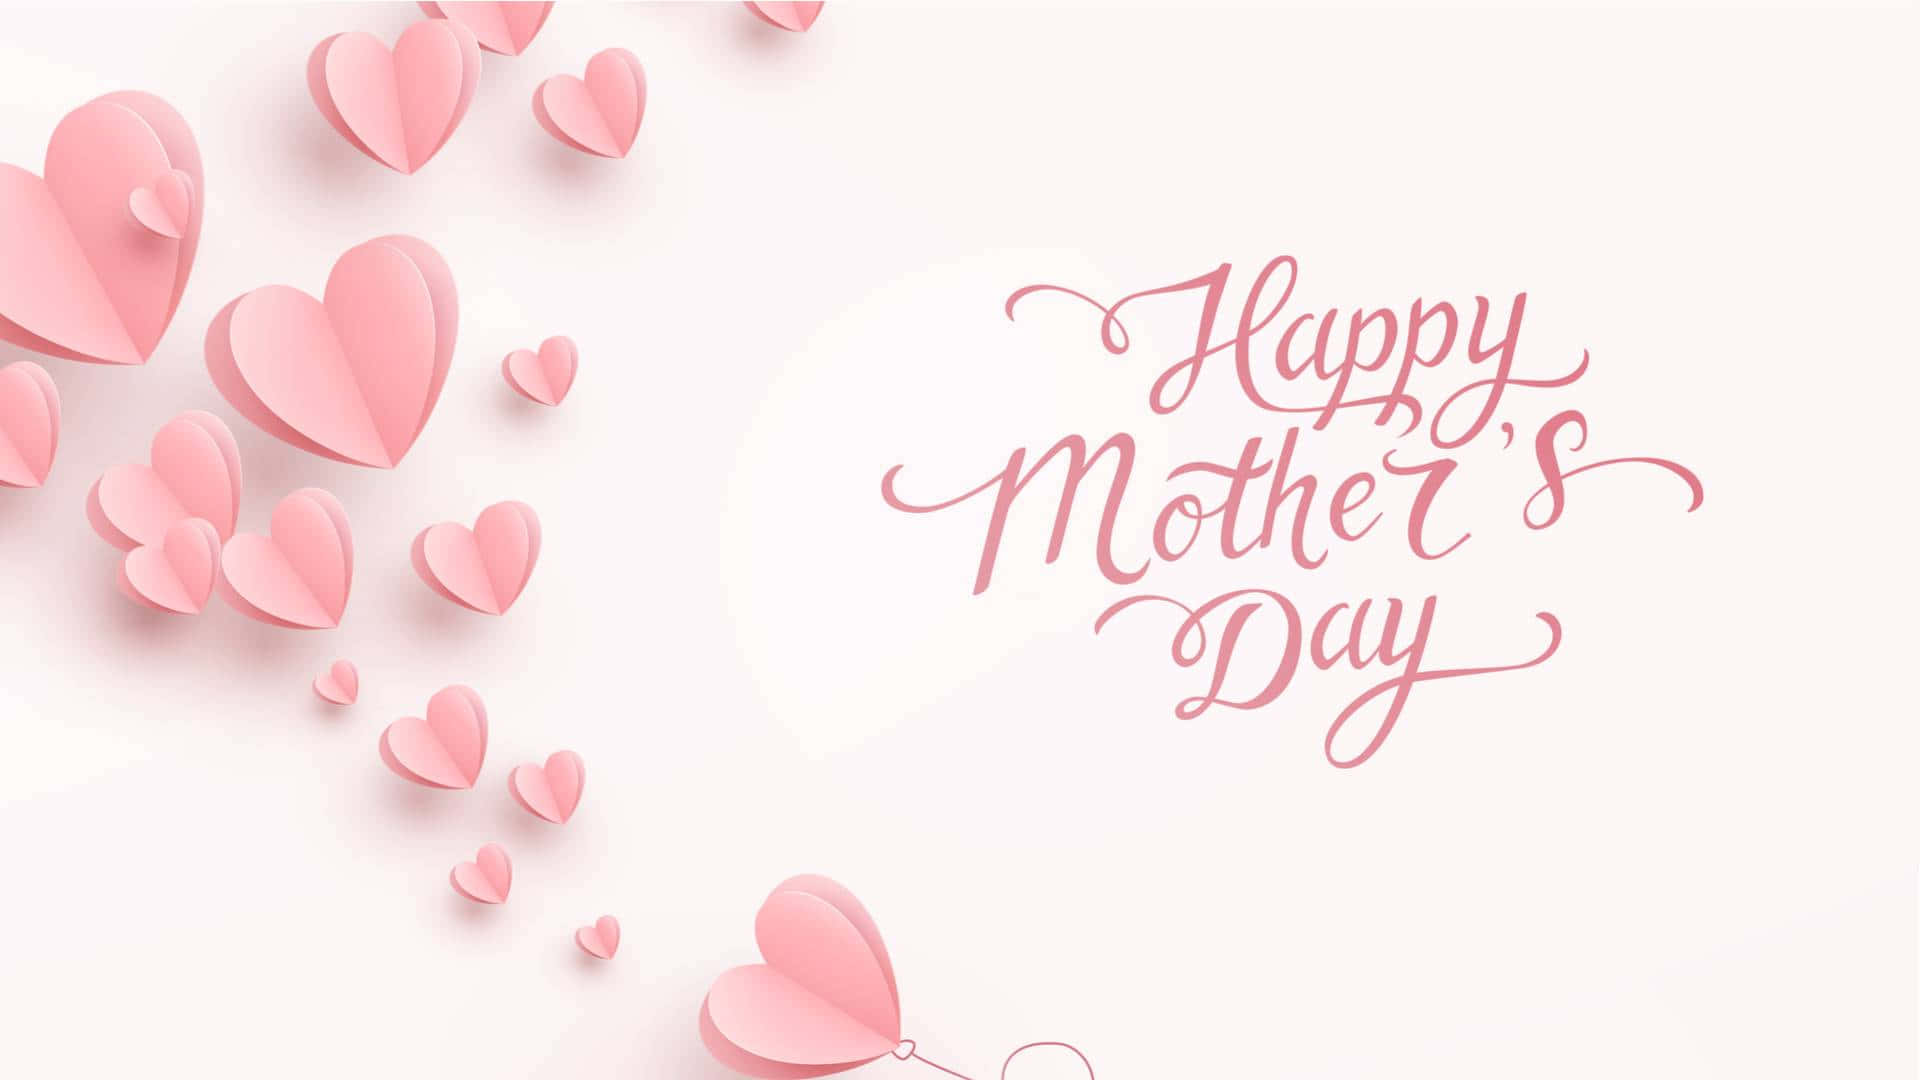 Celebrate the woman who loves you unconditionally this Mothers Day